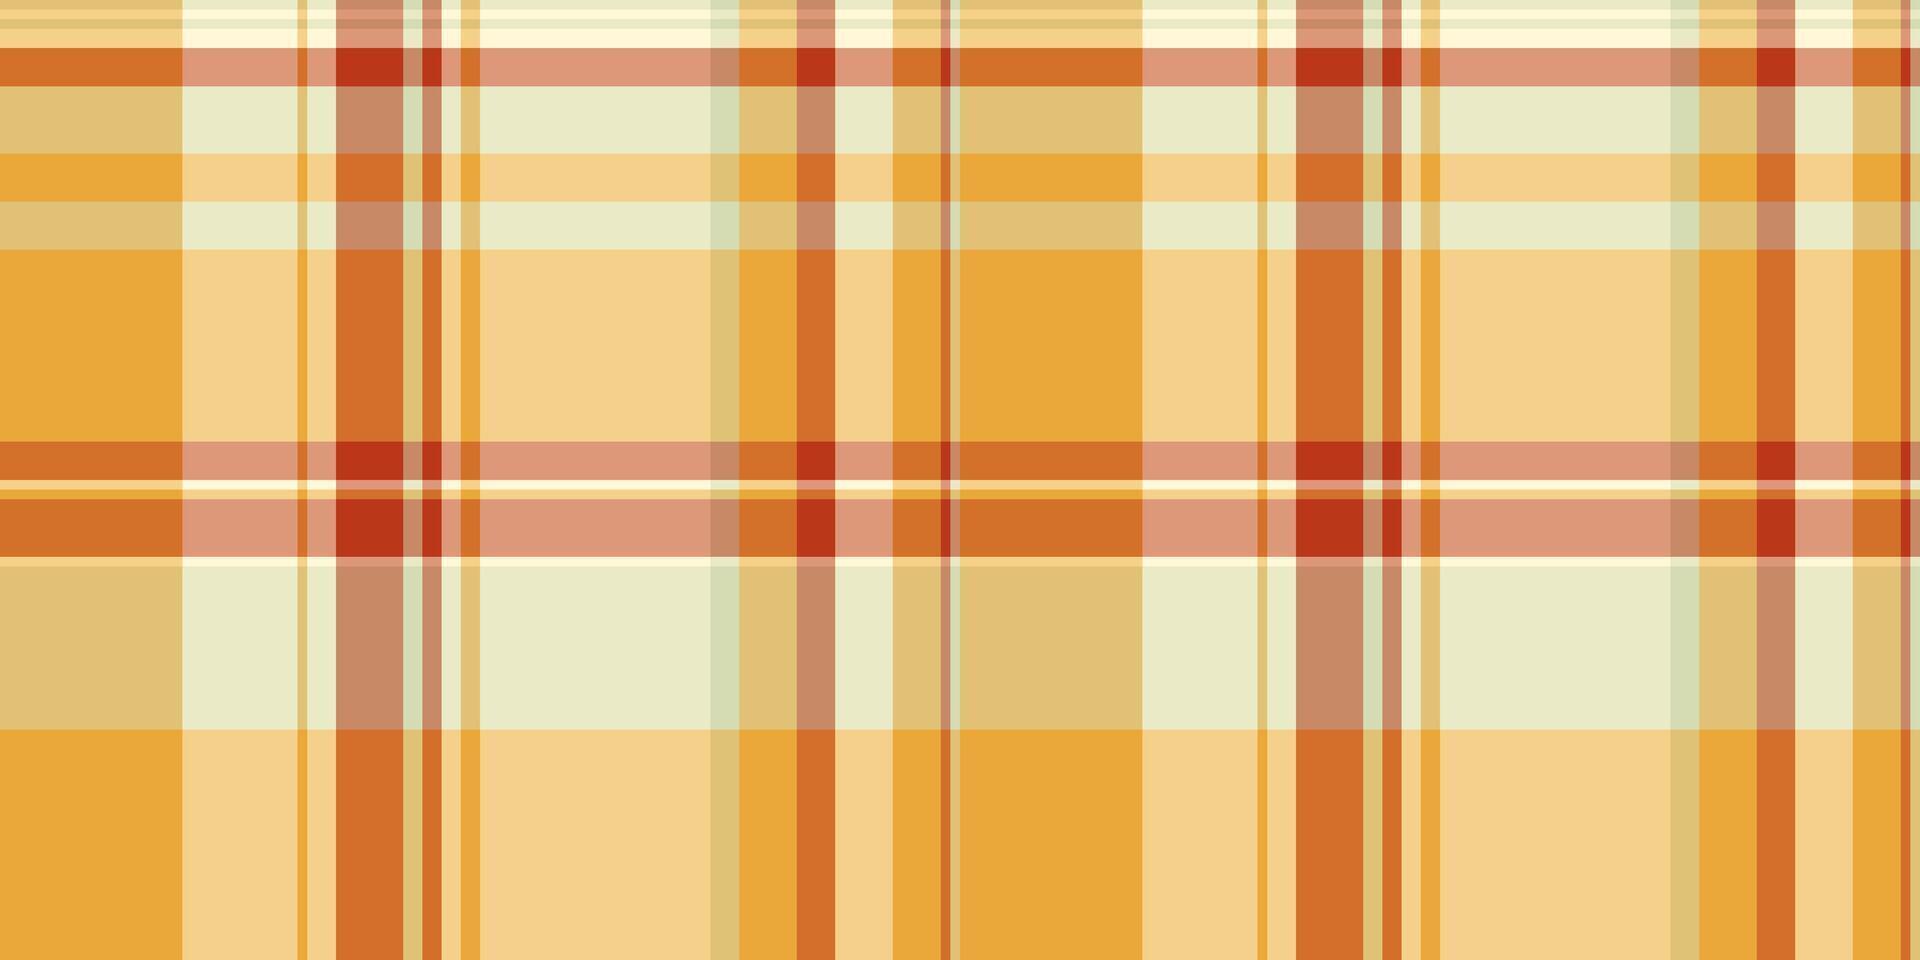 King tartan seamless fabric, vertical texture background vector. Linen pattern check plaid textile in amber and orange colors. vector